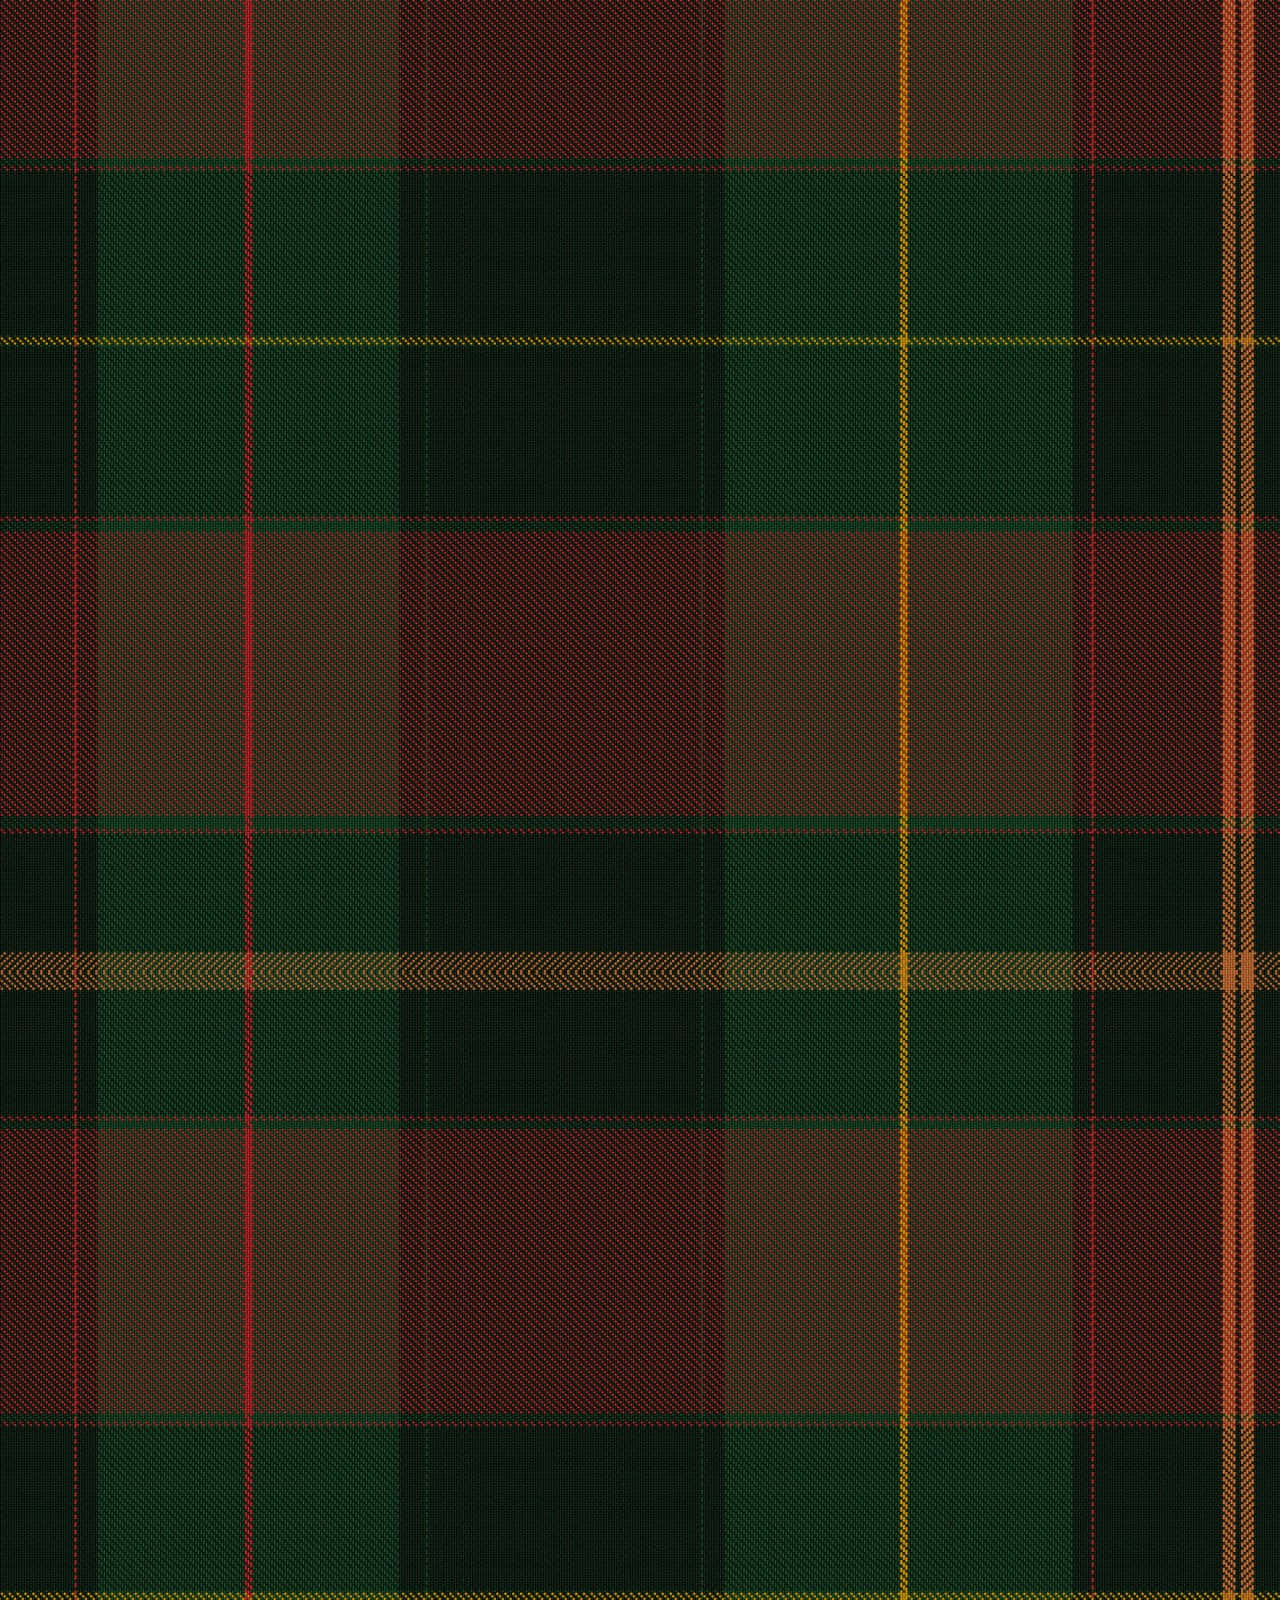 Vibrant Horizontal And Vertical Plaid Background